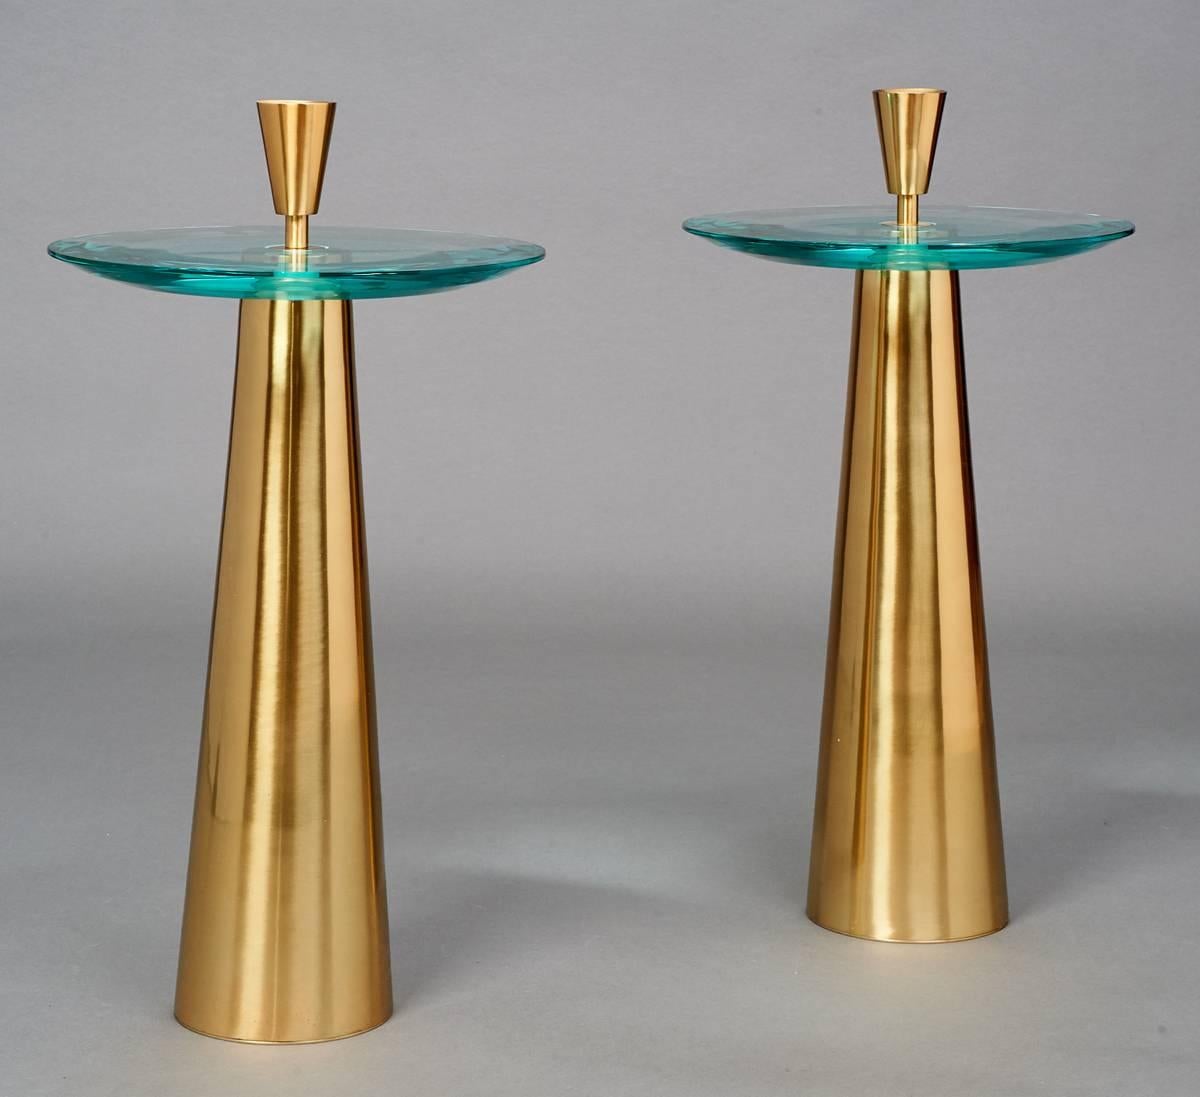 Roberto Rida (b. 1943)
A sculptural side table 
Triple beveled glass, polished tapered brass base and finial
Signed, Italy 2017
Limited edition, exclusive to L' Art de Vivre
Dimensions: 13.5 Ø x 22.5 H at glass. 
Shown as a pair. PRICED AND SOLD